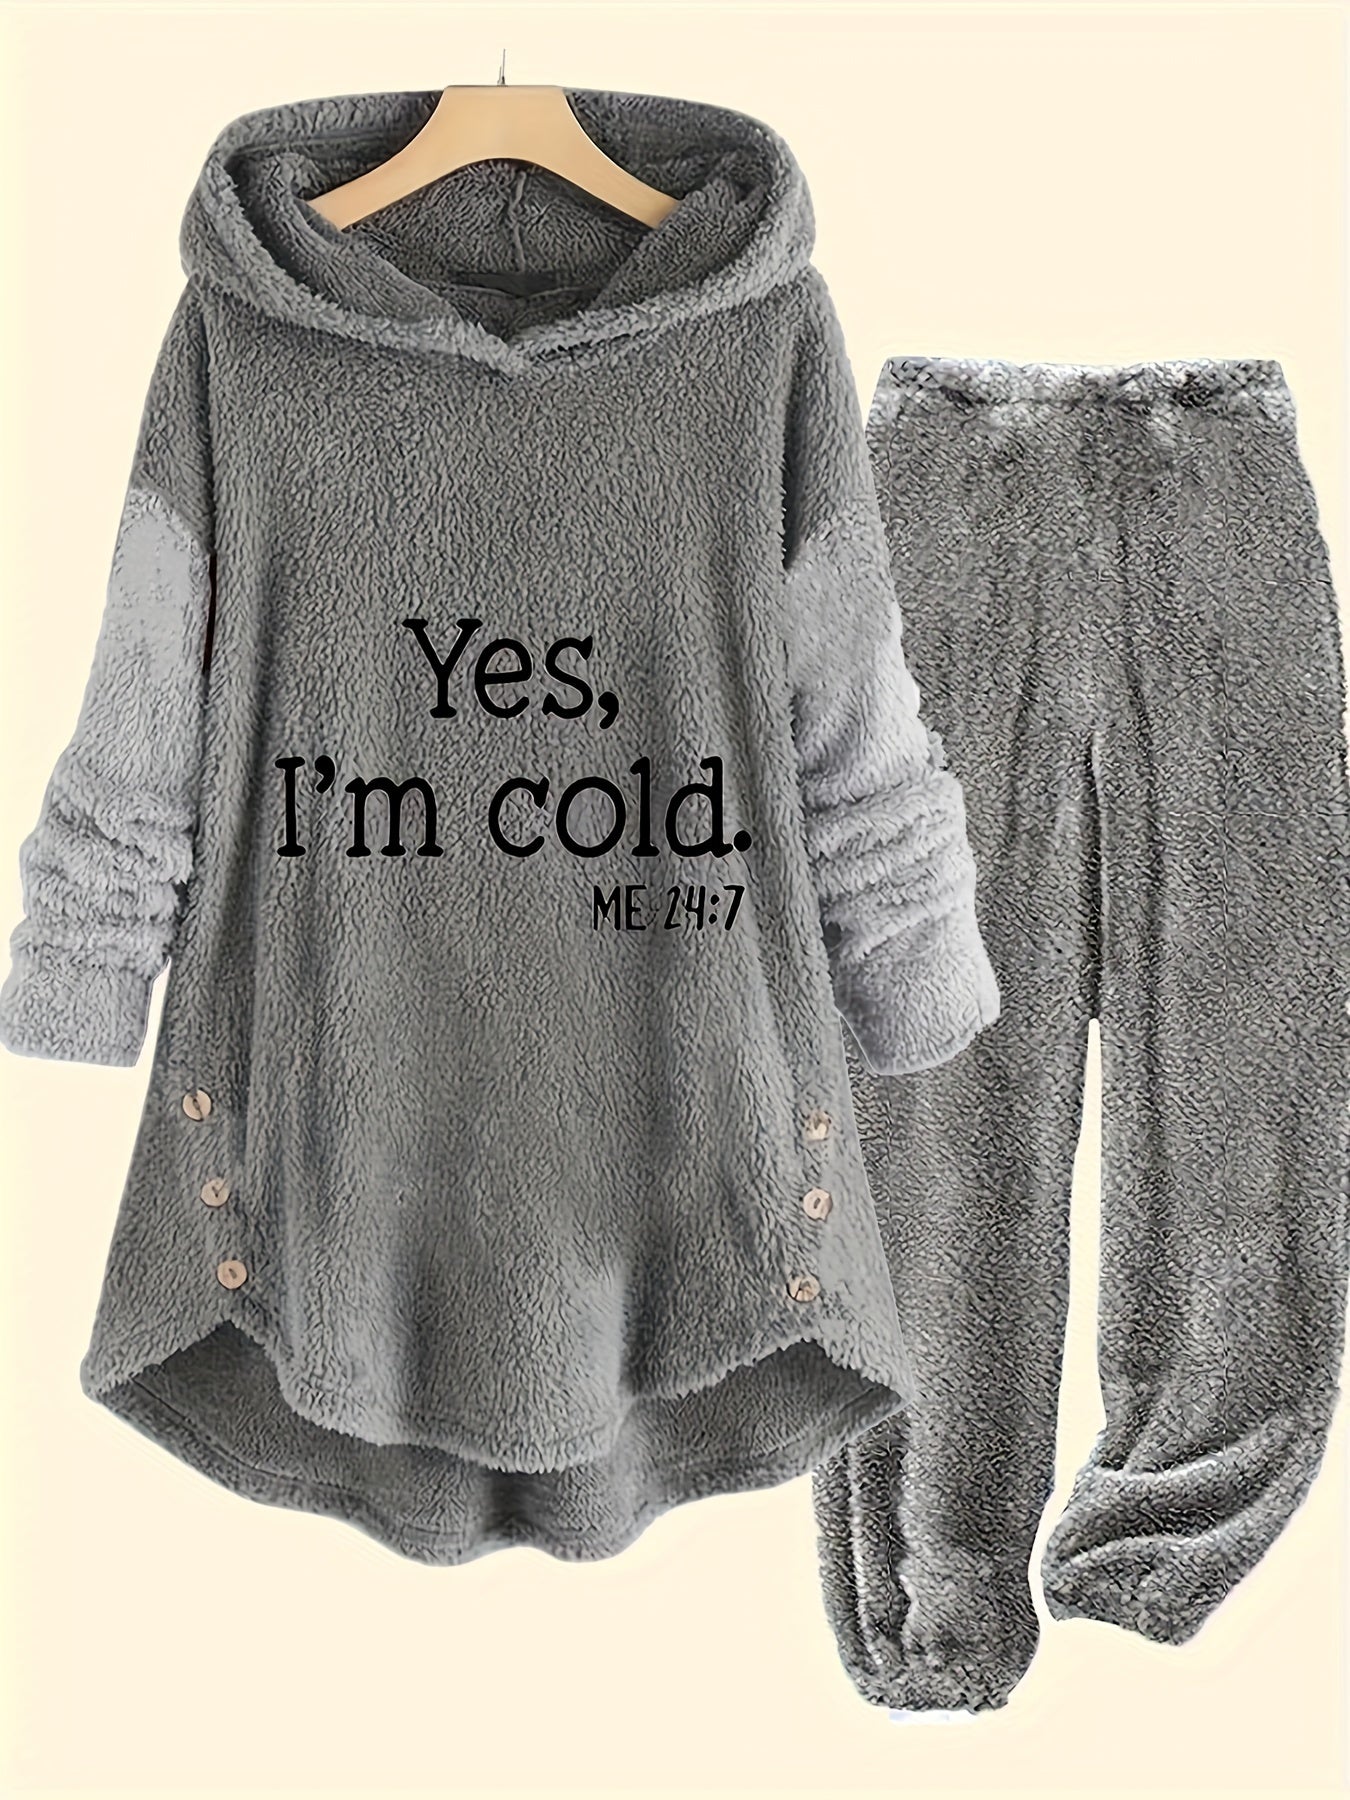 A Fuzzy Casual Two-piece Set, Letter Pattern Button Decor Hoodie & Pants Outfits, Women's Clothing from Maramalive™ with a long-sleeve hoodie featuring the text "Yes, I'm cold. ME 24:7" and cozy matching pants, crafted from soft polyester and displayed on a hanger against a plain background.